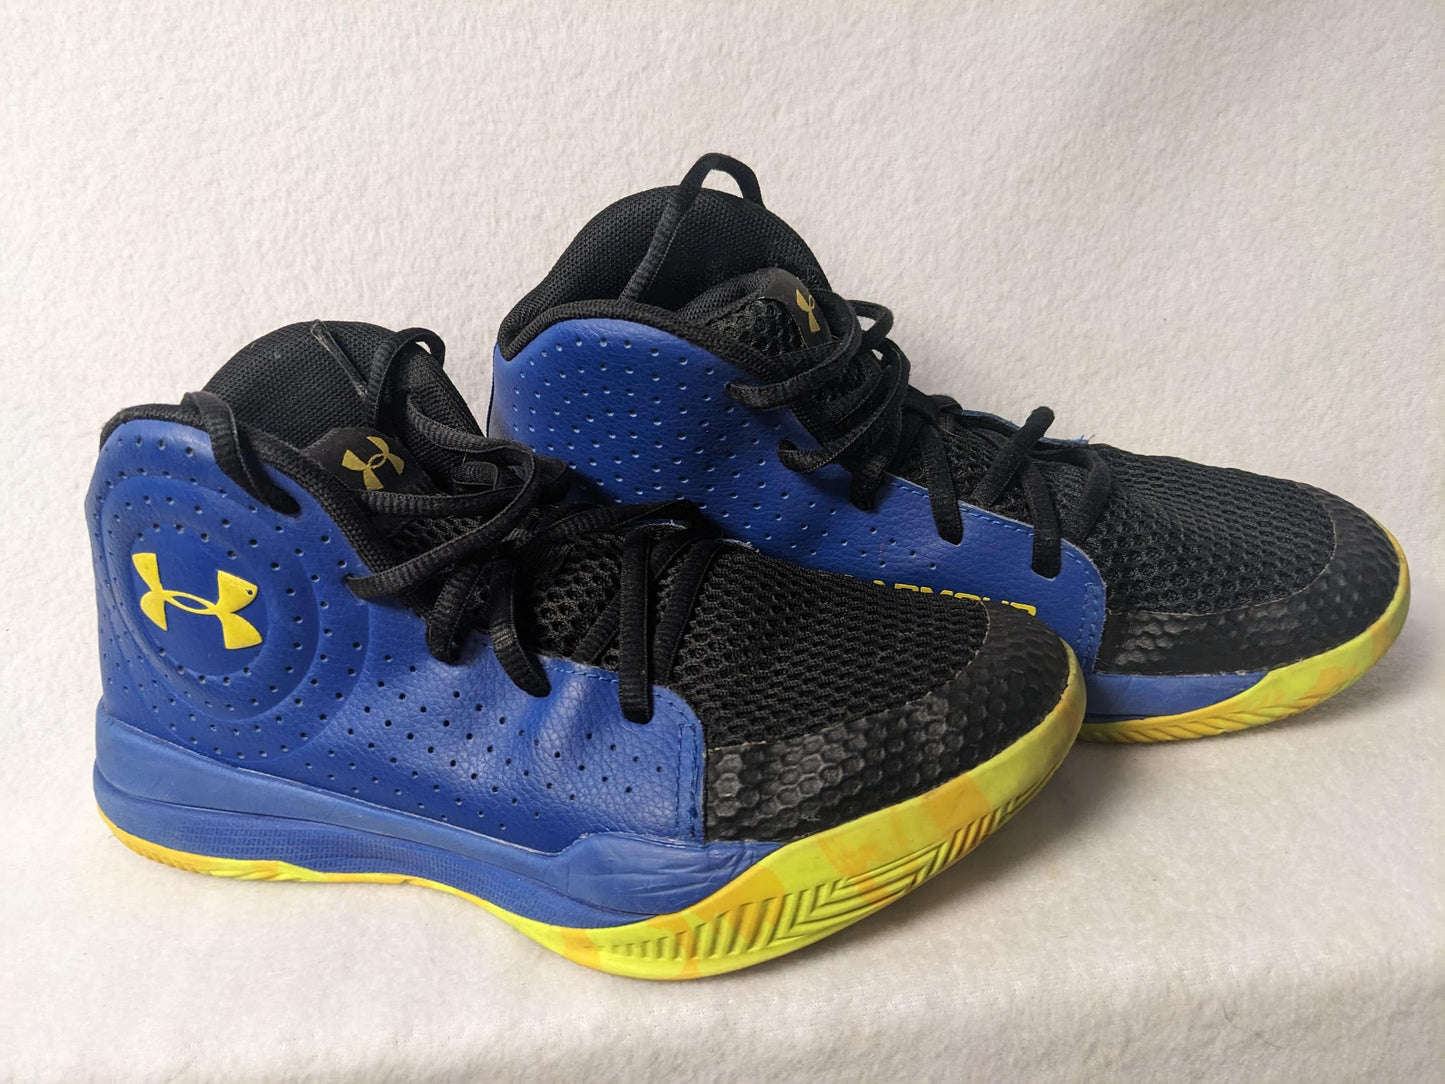 Under Armour Athletic Shoes Size 5 Color Blue Condition Used